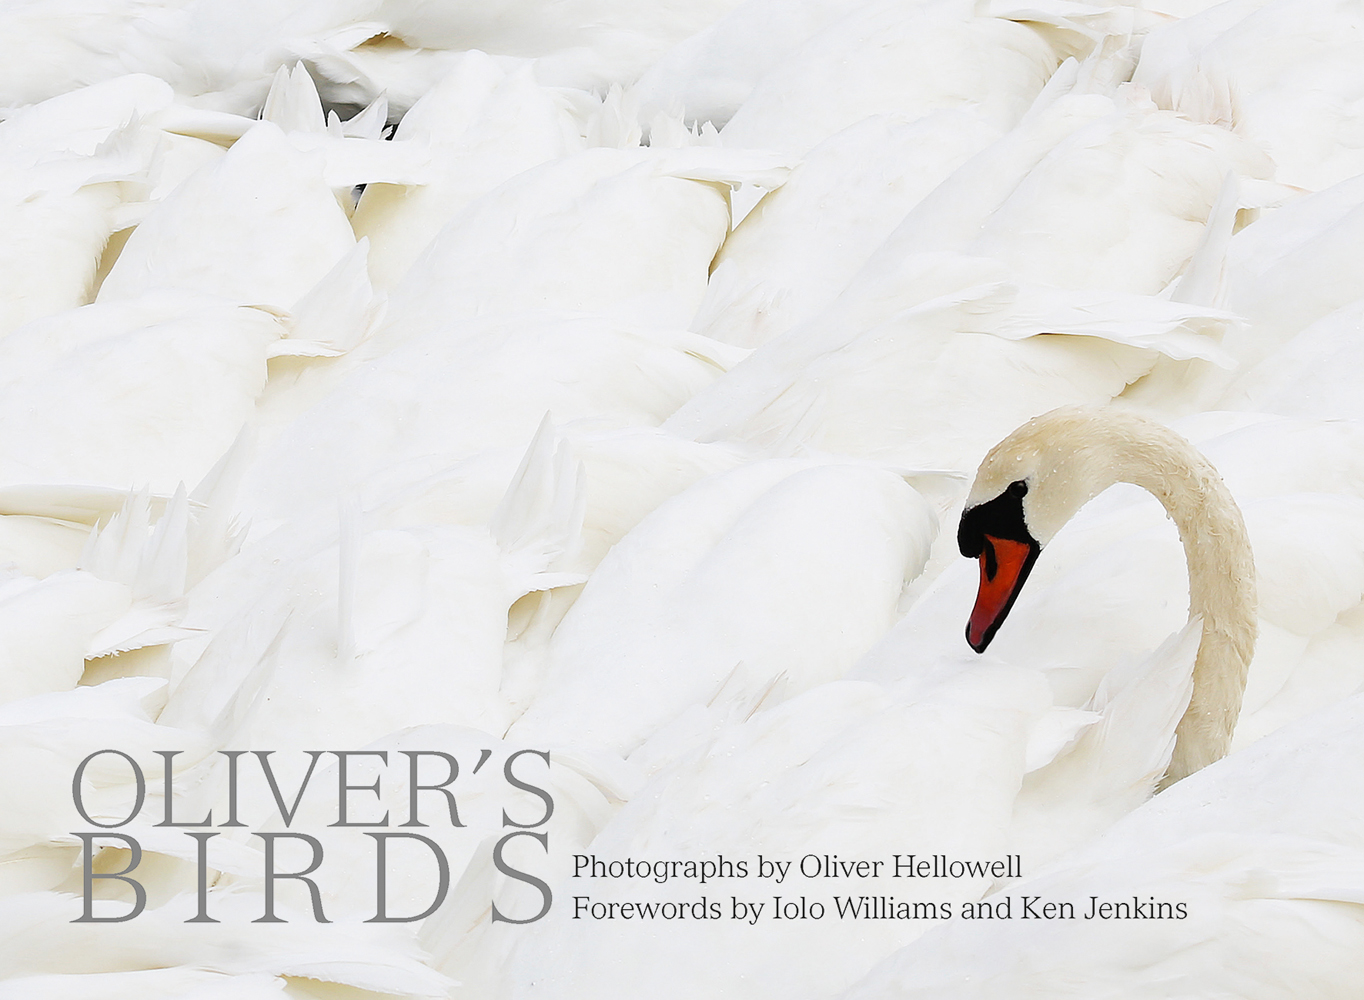 Head and neck of a white swan amongst the tail feathers of other swans, on cover of 'Oliver's Birds' by ACC Art Books.